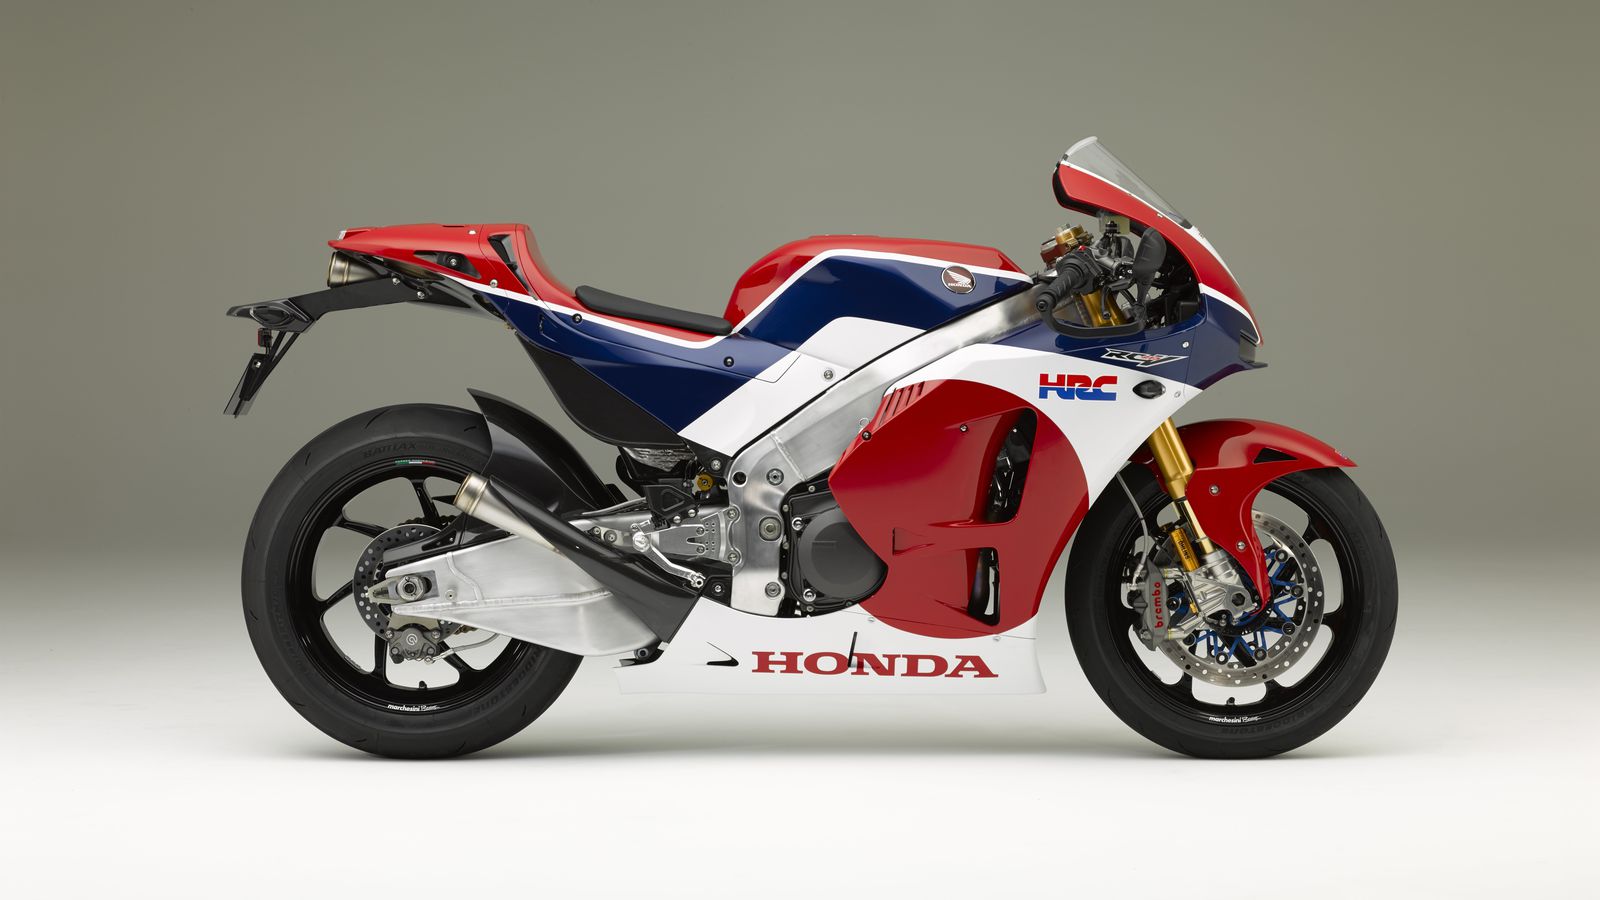 Honda will sell you its RC213V race bike for just $184,000 